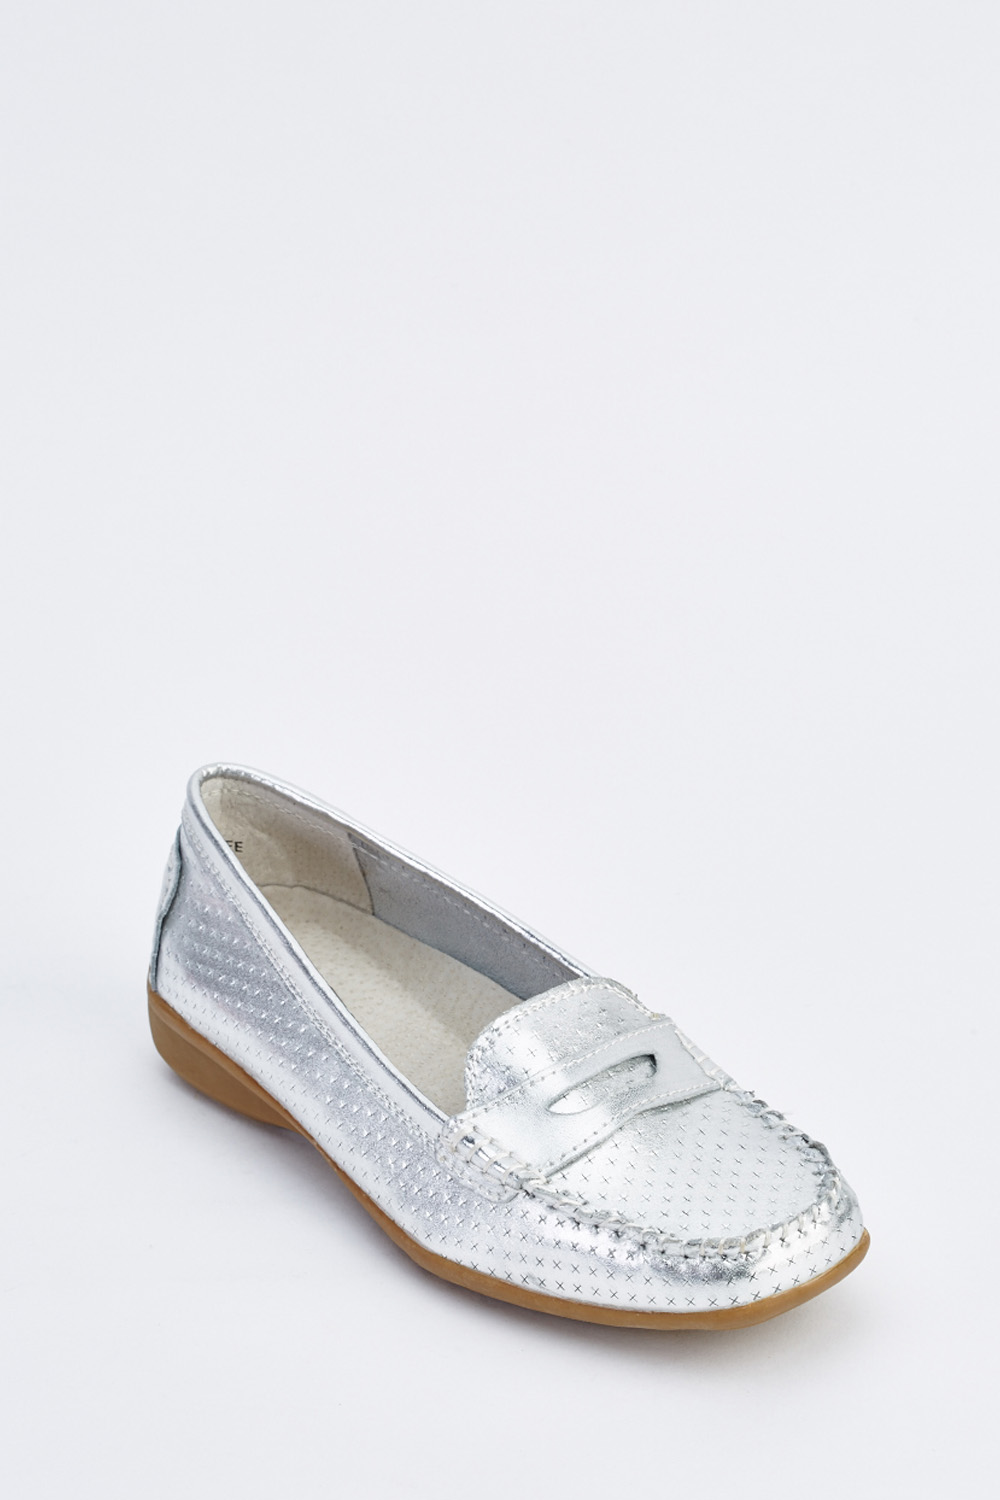 Metallic Flat Moccasin Shoes - Just $7